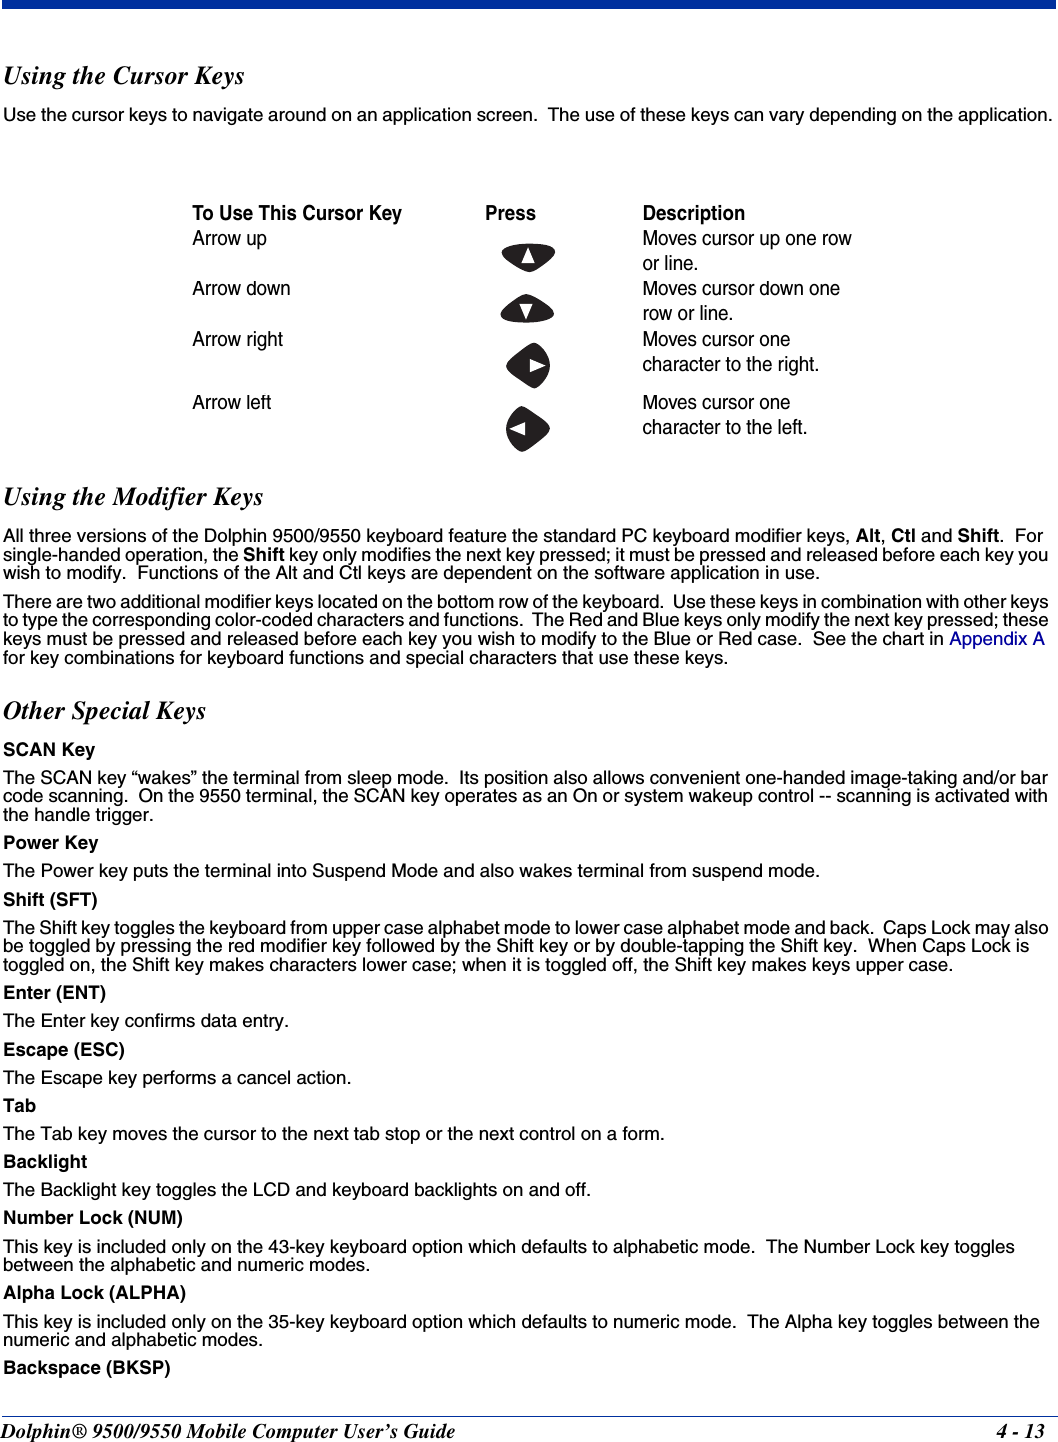 Dolphin® 9500/9550 Mobile Computer User’s Guide 4 - 13Using the Cursor KeysUse the cursor keys to navigate around on an application screen.  The use of these keys can vary depending on the application.Using the Modifier KeysAll three versions of the Dolphin 9500/9550 keyboard feature the standard PC keyboard modifier keys, Alt, Ctl and Shift.  For single-handed operation, the Shift key only modifies the next key pressed; it must be pressed and released before each key you wish to modify.  Functions of the Alt and Ctl keys are dependent on the software application in use.There are two additional modifier keys located on the bottom row of the keyboard.  Use these keys in combination with other keys to type the corresponding color-coded characters and functions.  The Red and Blue keys only modify the next key pressed; these keys must be pressed and released before each key you wish to modify to the Blue or Red case.  See the chart in Appendix A for key combinations for keyboard functions and special characters that use these keys.Other Special KeysSCAN KeyThe SCAN key “wakes” the terminal from sleep mode.  Its position also allows convenient one-handed image-taking and/or bar code scanning.  On the 9550 terminal, the SCAN key operates as an On or system wakeup control -- scanning is activated with the handle trigger.Power KeyThe Power key puts the terminal into Suspend Mode and also wakes terminal from suspend mode.Shift (SFT)The Shift key toggles the keyboard from upper case alphabet mode to lower case alphabet mode and back.  Caps Lock may also be toggled by pressing the red modifier key followed by the Shift key or by double-tapping the Shift key.  When Caps Lock is toggled on, the Shift key makes characters lower case; when it is toggled off, the Shift key makes keys upper case.Enter (ENT)The Enter key confirms data entry.Escape (ESC)The Escape key performs a cancel action.  TabThe Tab key moves the cursor to the next tab stop or the next control on a form.  BacklightThe Backlight key toggles the LCD and keyboard backlights on and off.Number Lock (NUM)This key is included only on the 43-key keyboard option which defaults to alphabetic mode.  The Number Lock key toggles between the alphabetic and numeric modes.  Alpha Lock (ALPHA)This key is included only on the 35-key keyboard option which defaults to numeric mode.  The Alpha key toggles between the numeric and alphabetic modes.  Backspace (BKSP)To Use This Cursor Key               Press DescriptionArrow up Moves cursor up one row or line.Arrow down Moves cursor down one row or line.Arrow right Moves cursor one character to the right.Arrow left Moves cursor one character to the left.